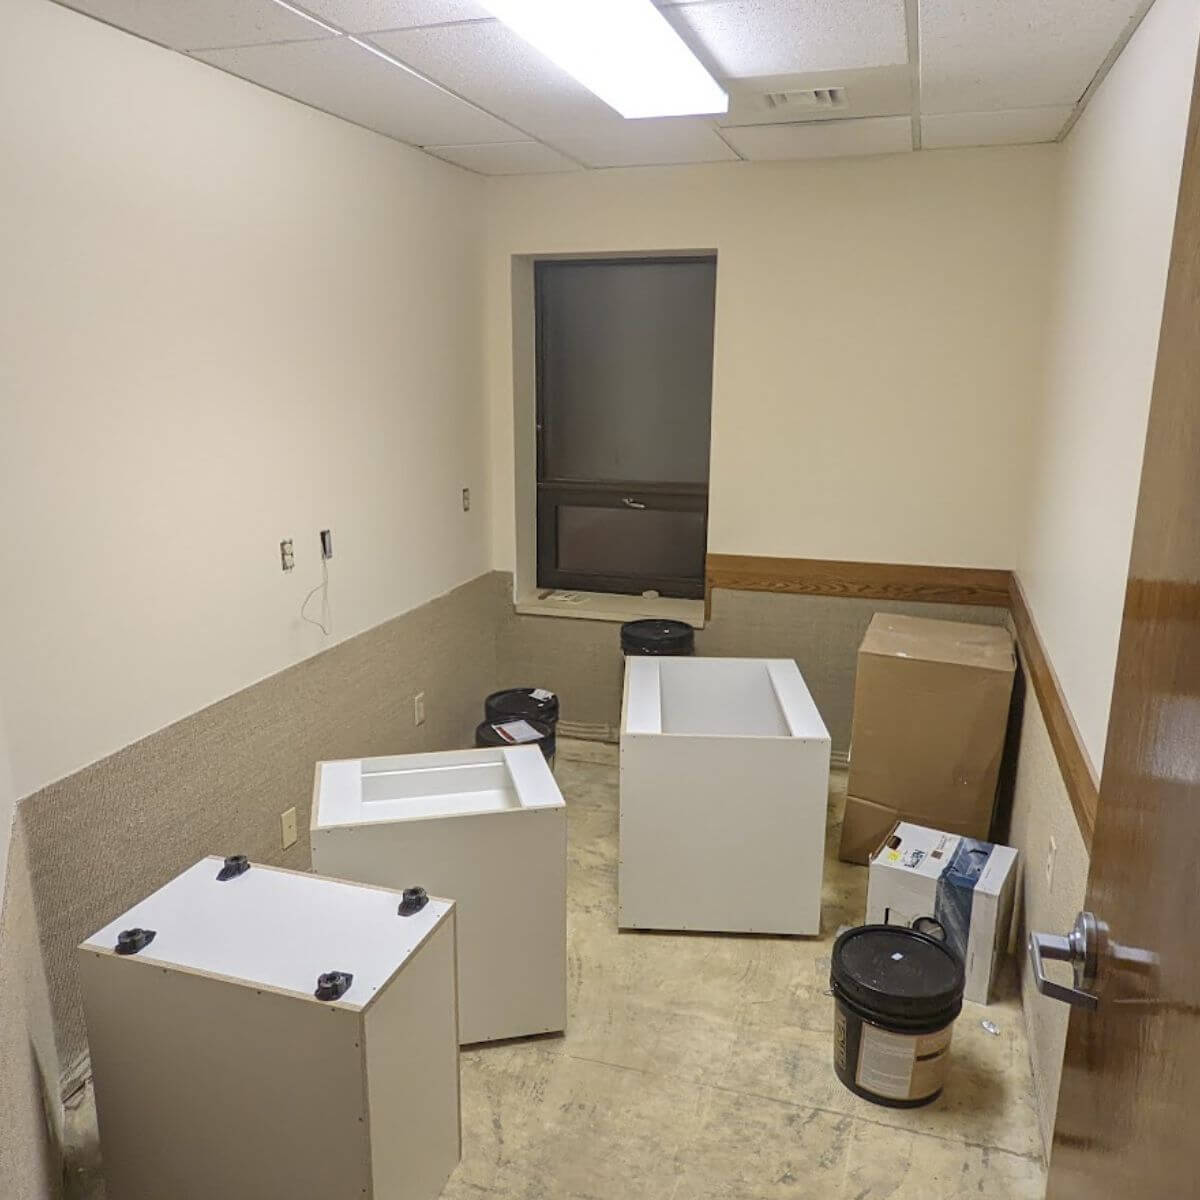 Church office remodeling in Etobicoke by Deomax